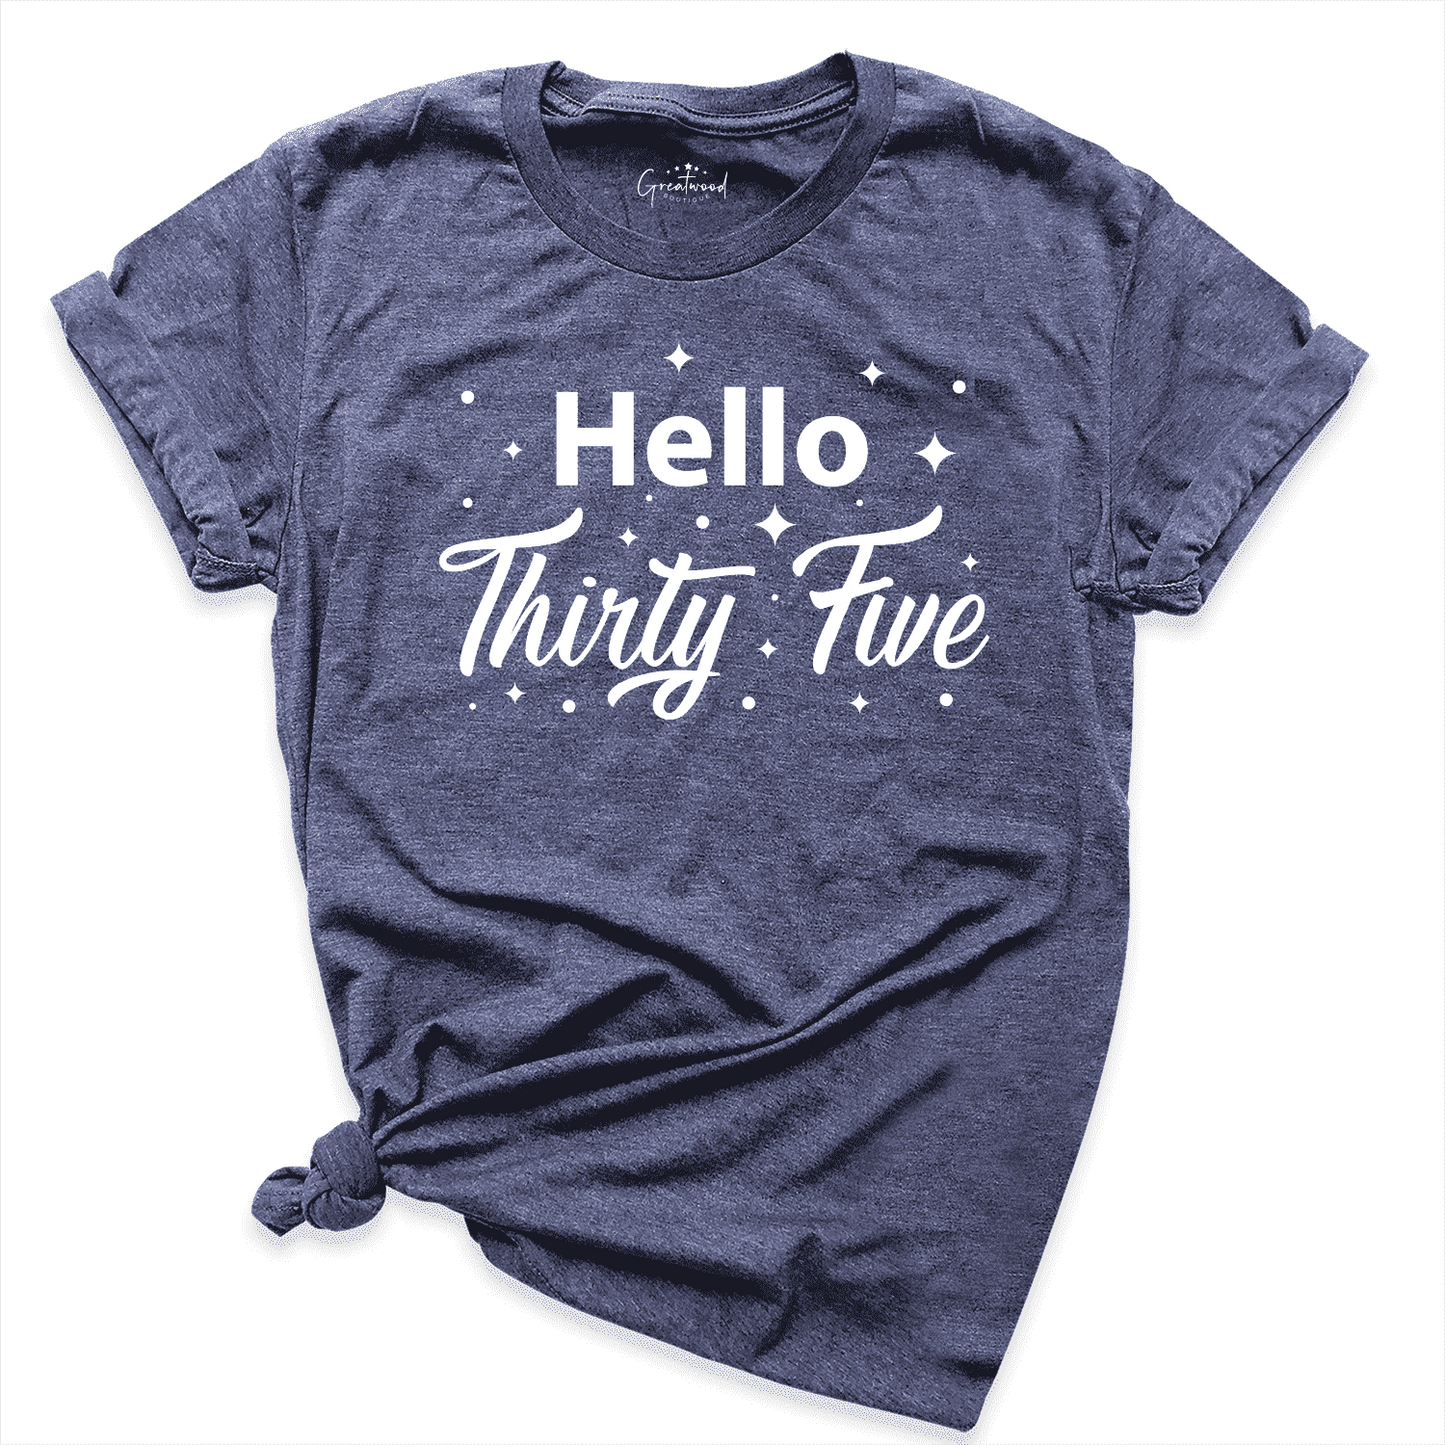 Hello 35th Birthday Shirt Navy - Greatwood Boutique